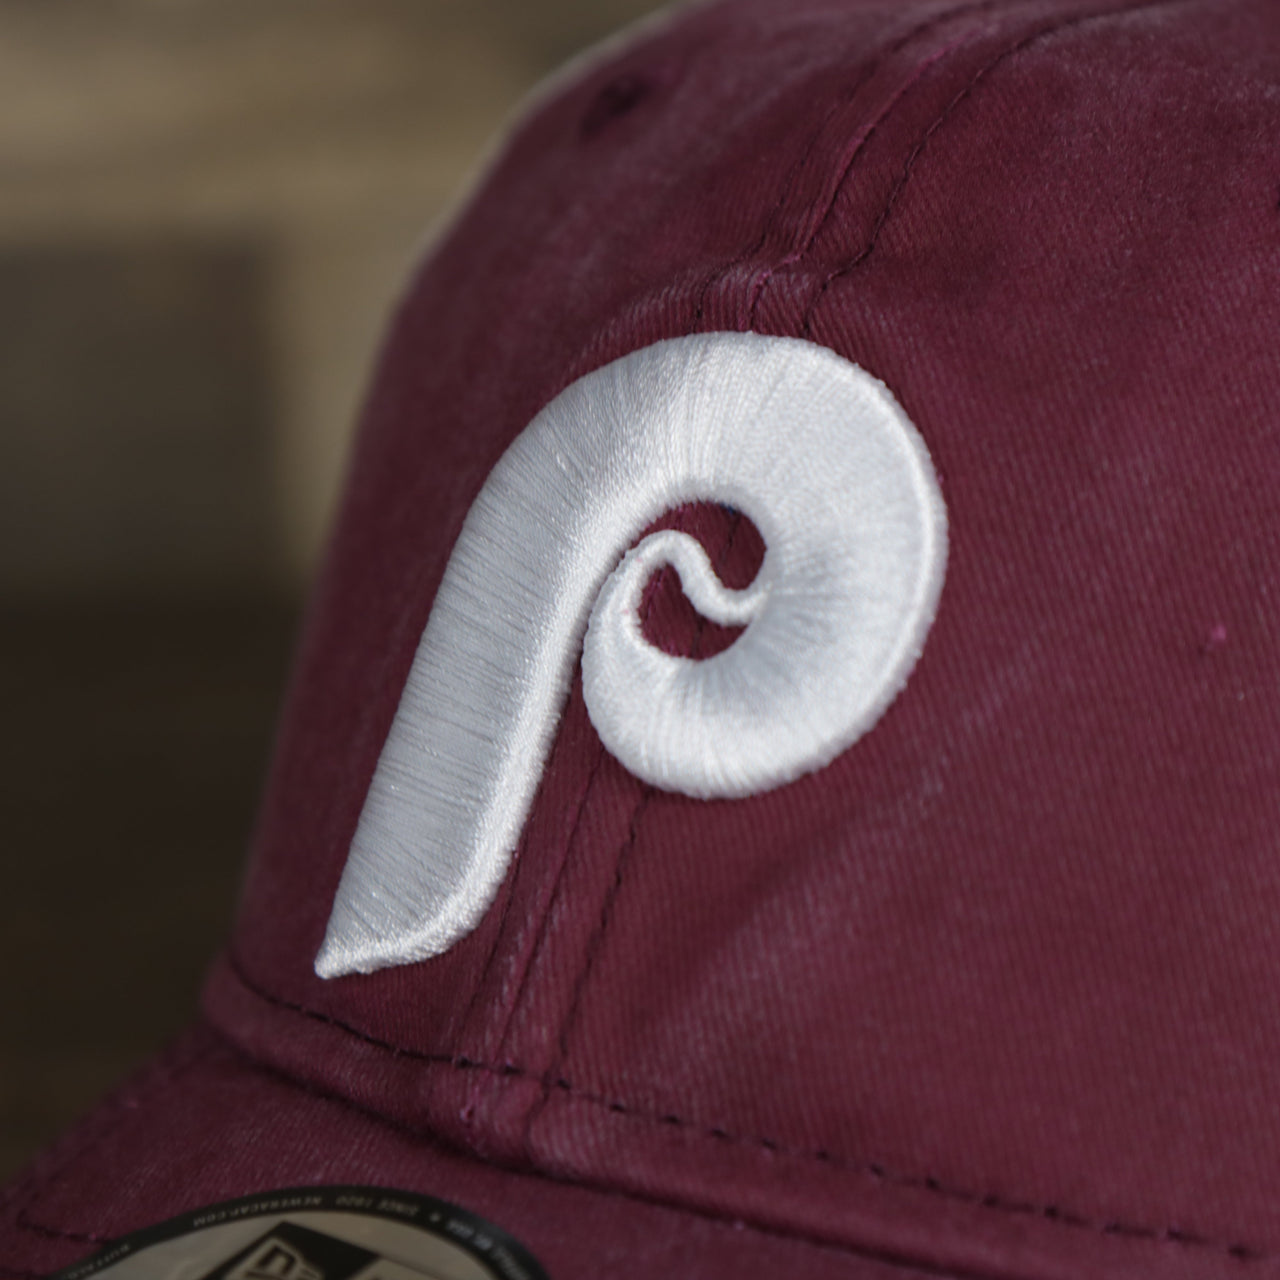 A close up of the Phillies Cooperstown on the Philadelphia Phillies Cooperstown New Era 9Twenty Washed Trucker hat